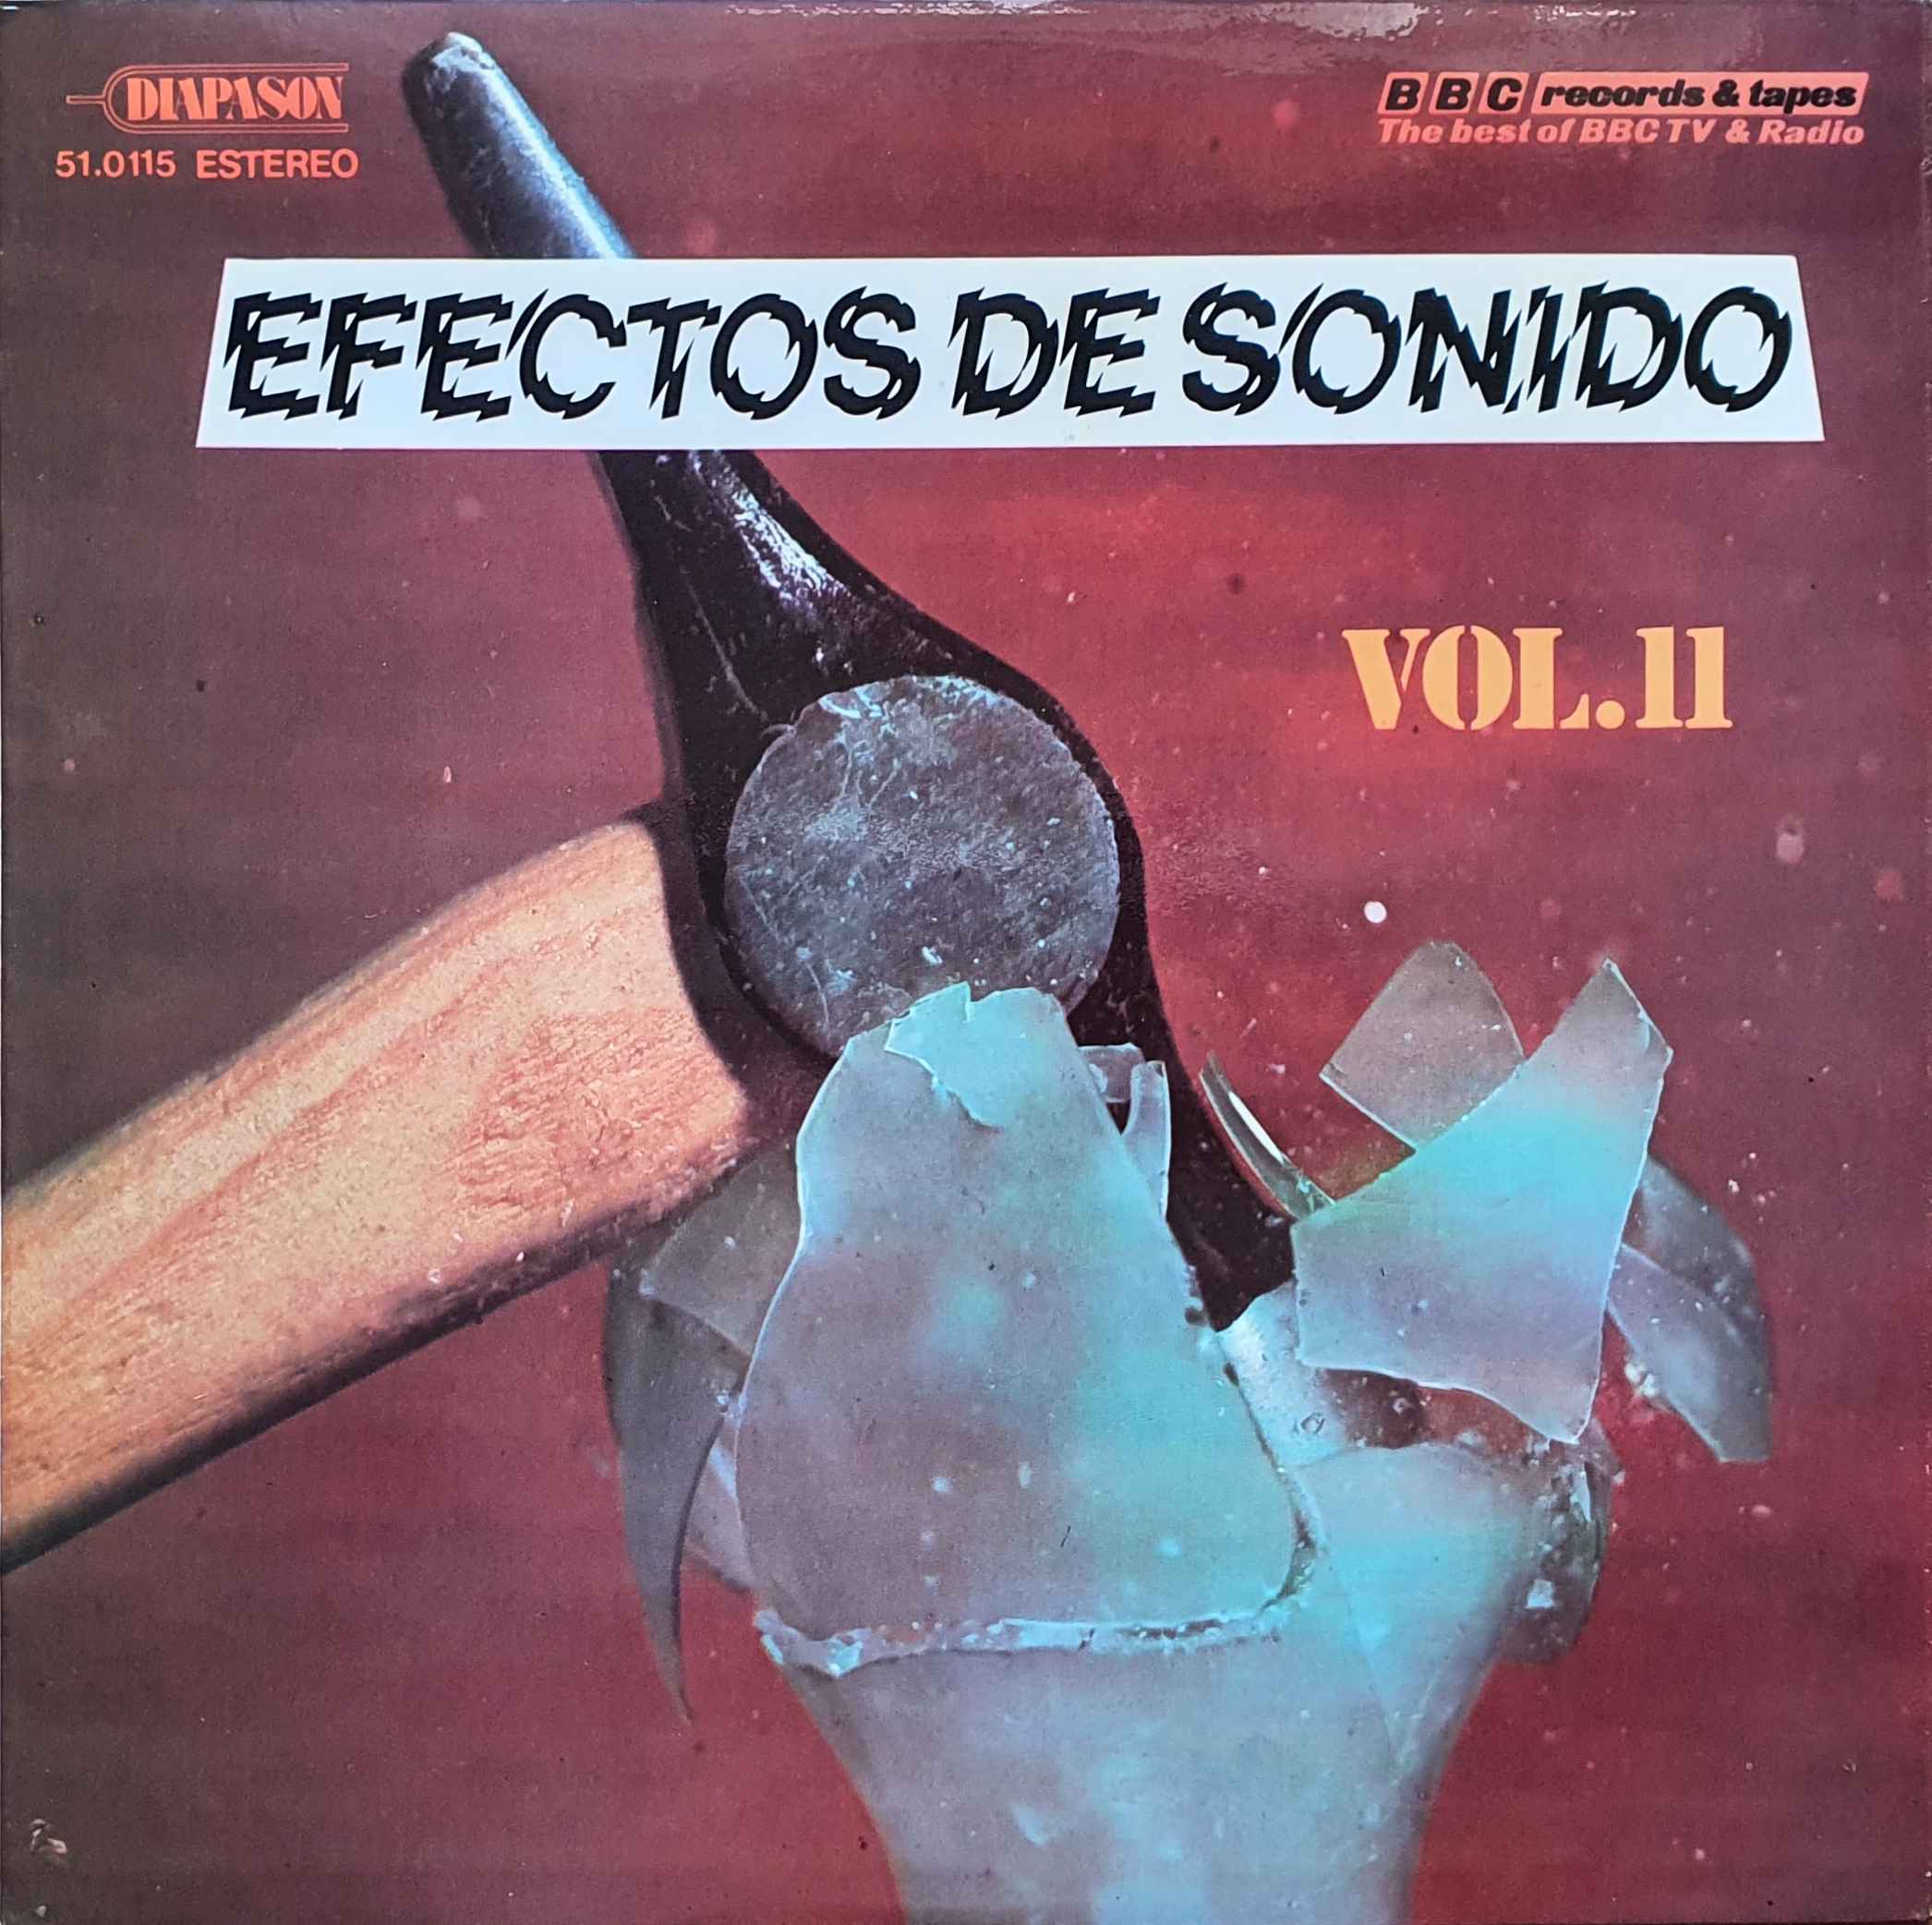 Picture of Efectos de sonido Vol.11 by artist Various from the BBC albums - Records and Tapes library